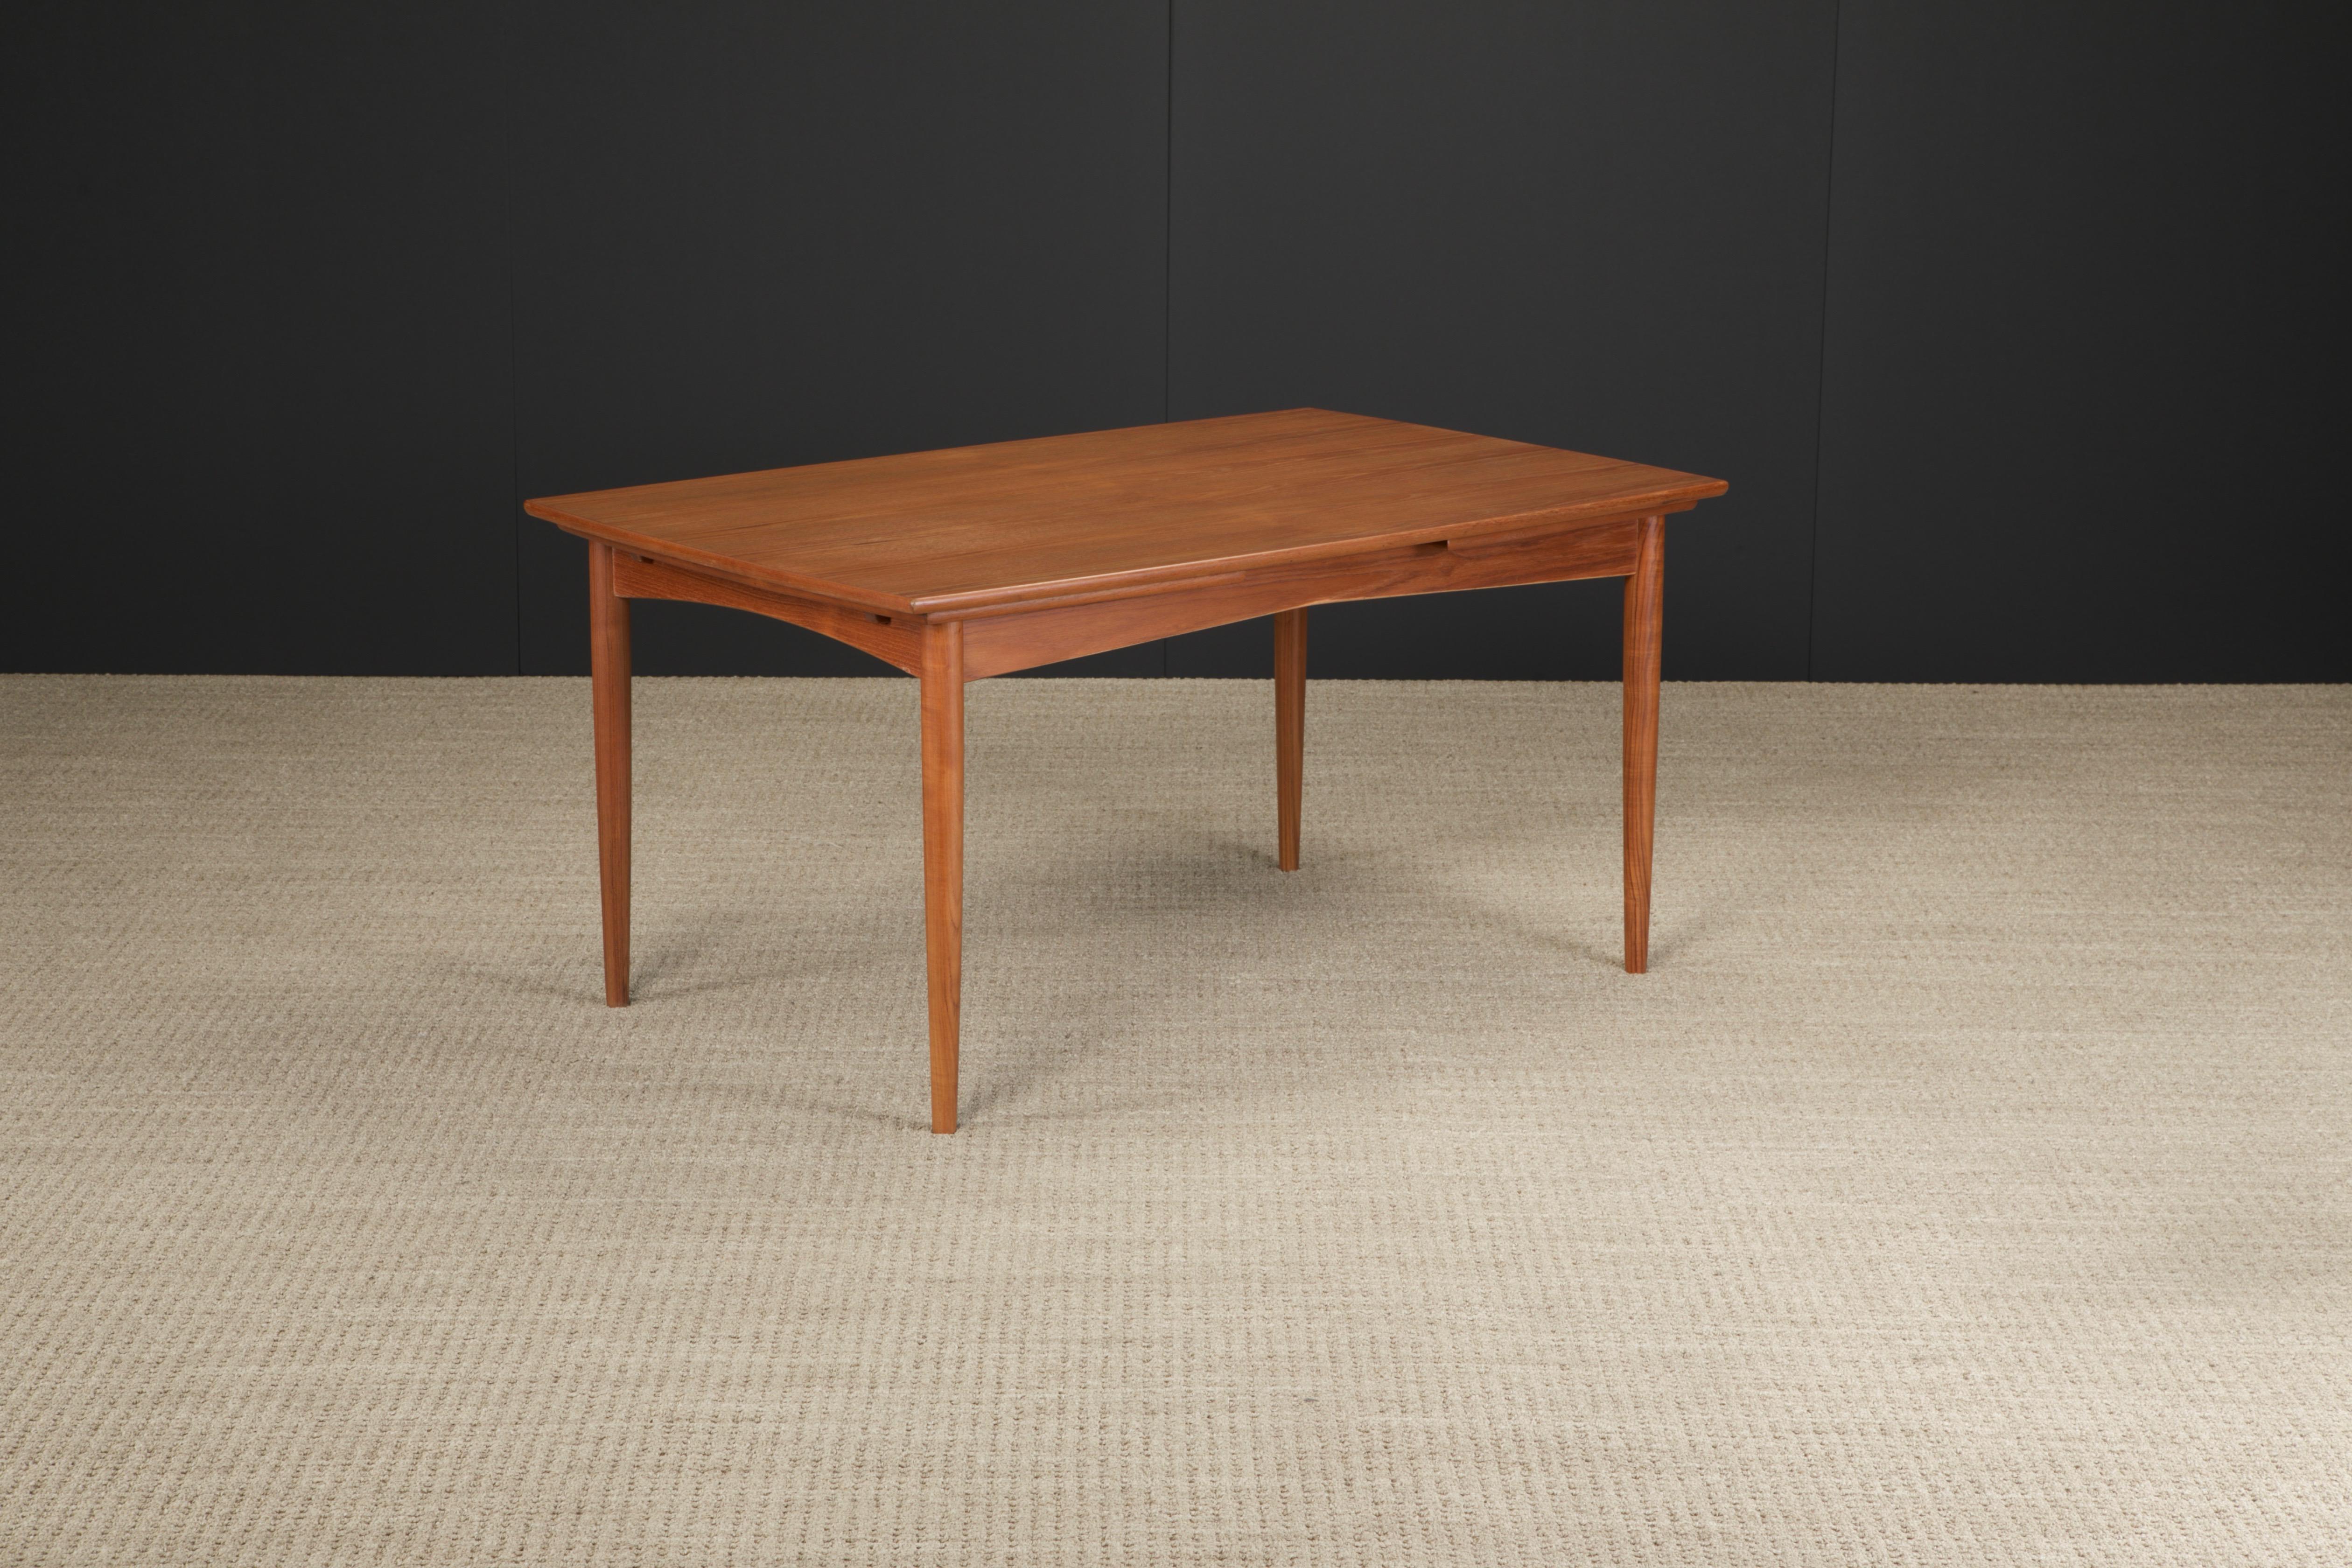 This teak Mid-Century Modern dining table is the perfect staple for any modern dining room. Expandable with nifty built-in leaves, this table can comfortably seat four (4) when collapsed and six (6) people when extended. Can squeeze in eight (8)